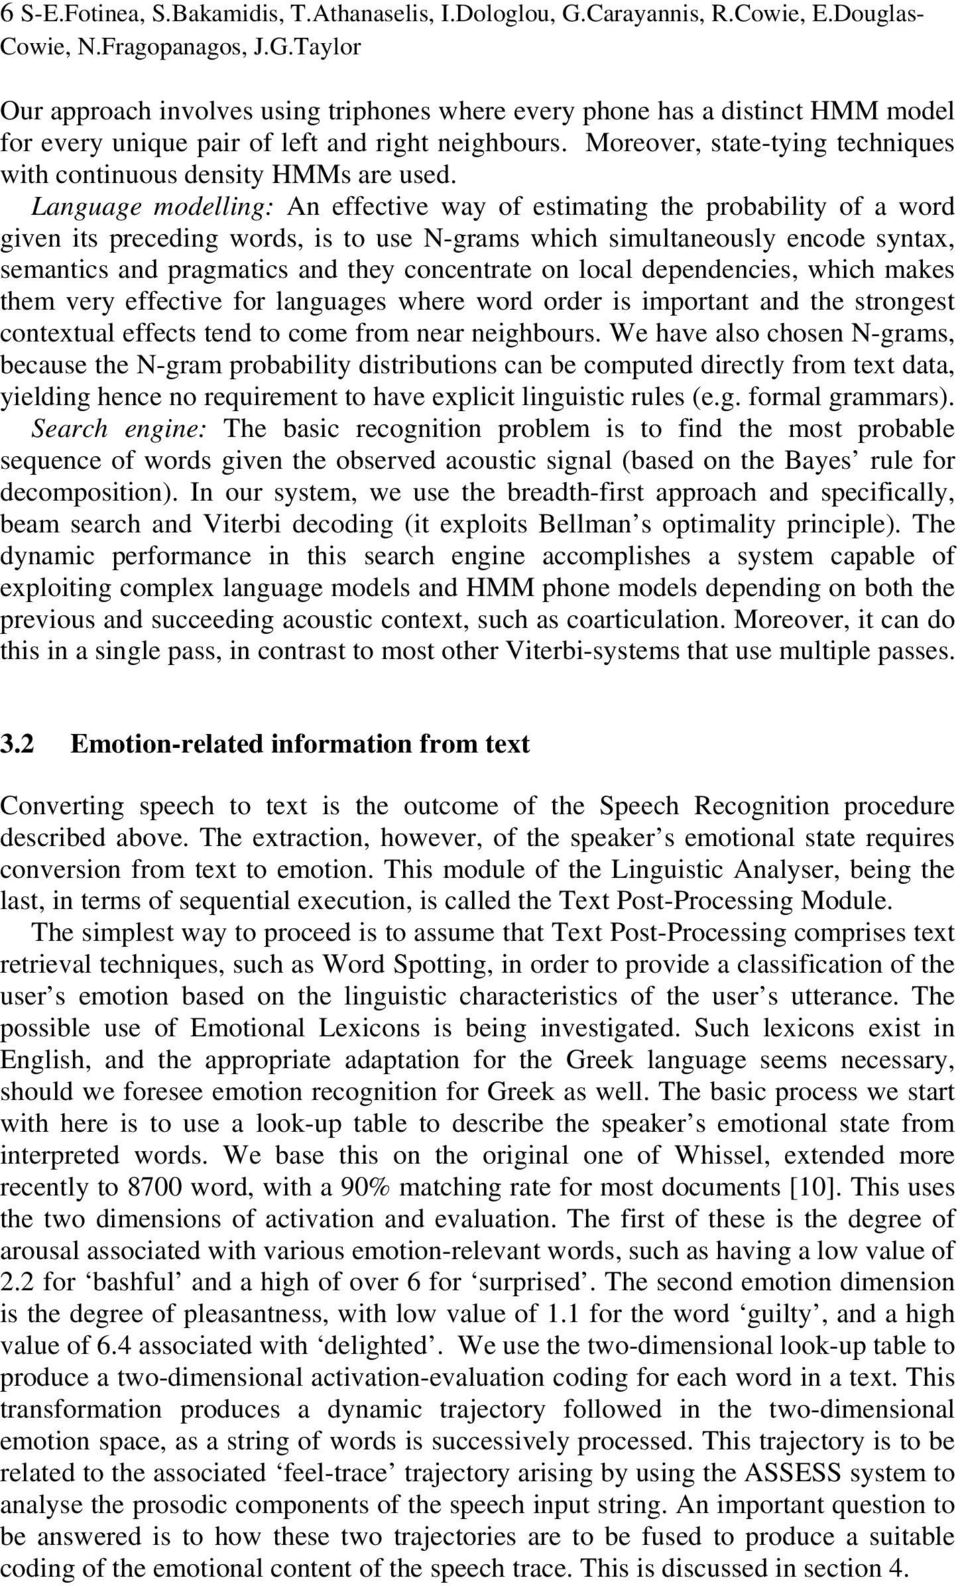 Language modelling: An effective way of estimating the probability of a word given its preceding words, is to use N-grams which simultaneously encode syntax, semantics and pragmatics and they